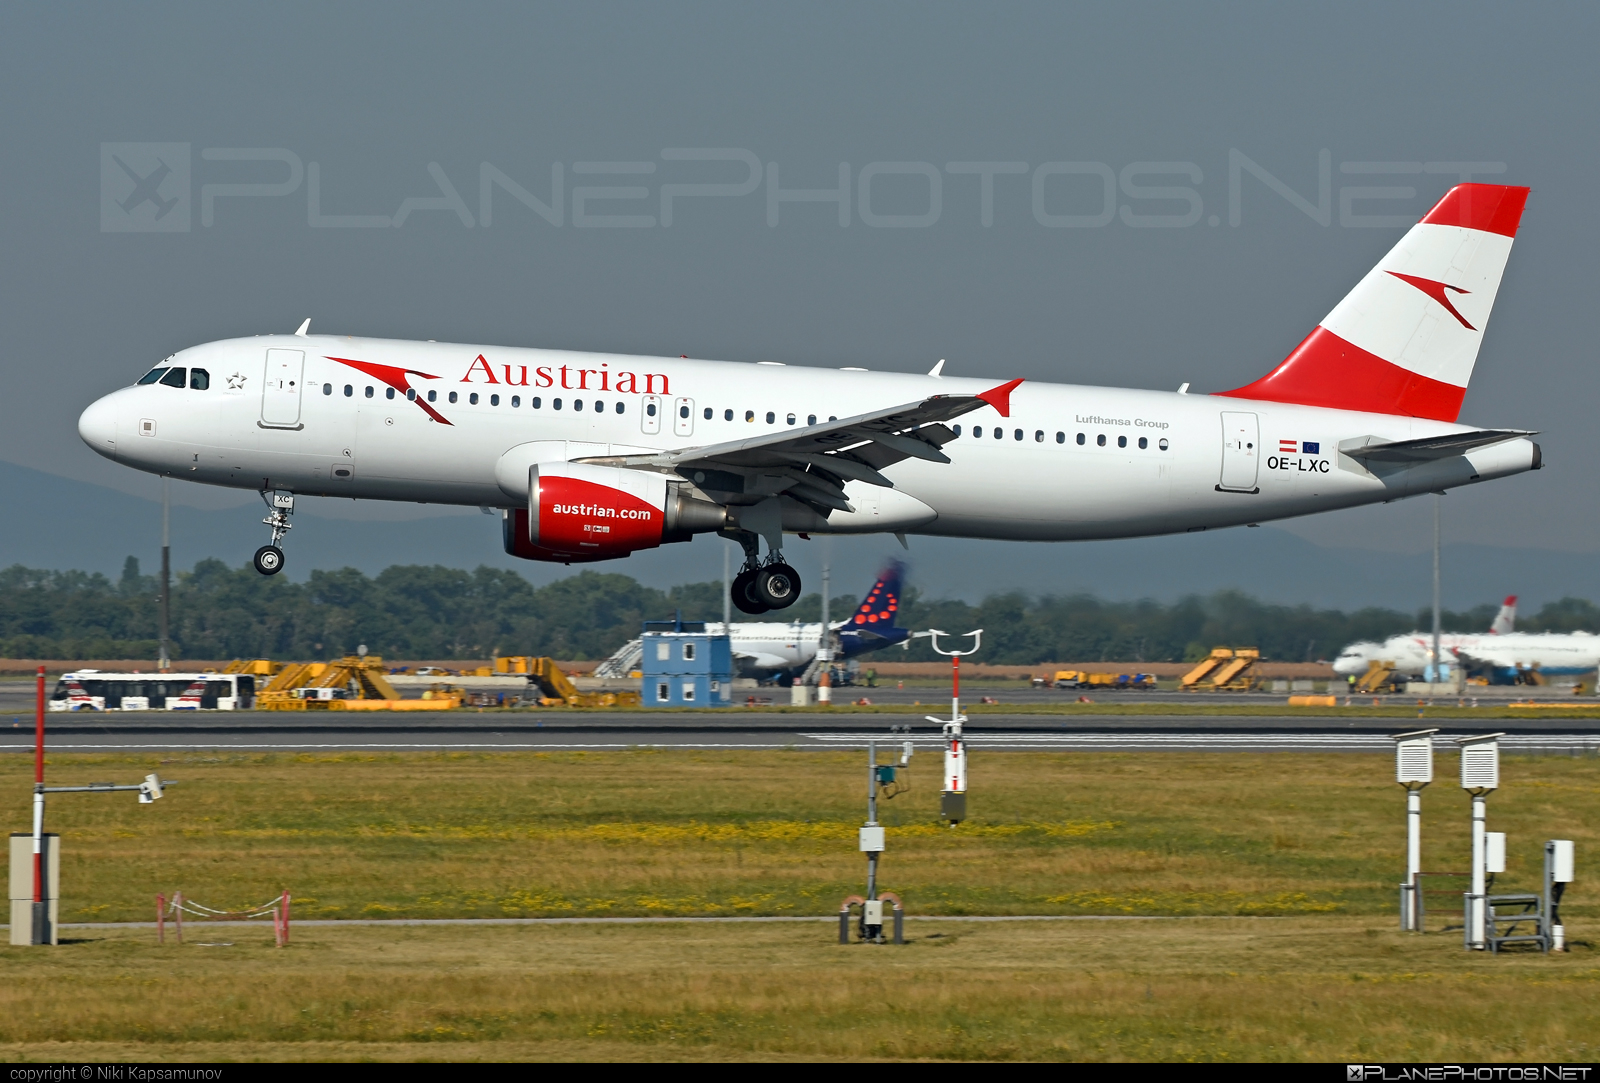 Airbus A320-216 - OE-LXC operated by Austrian Airlines #a320 #a320family #airbus #airbus320 #austrian #austrianAirlines